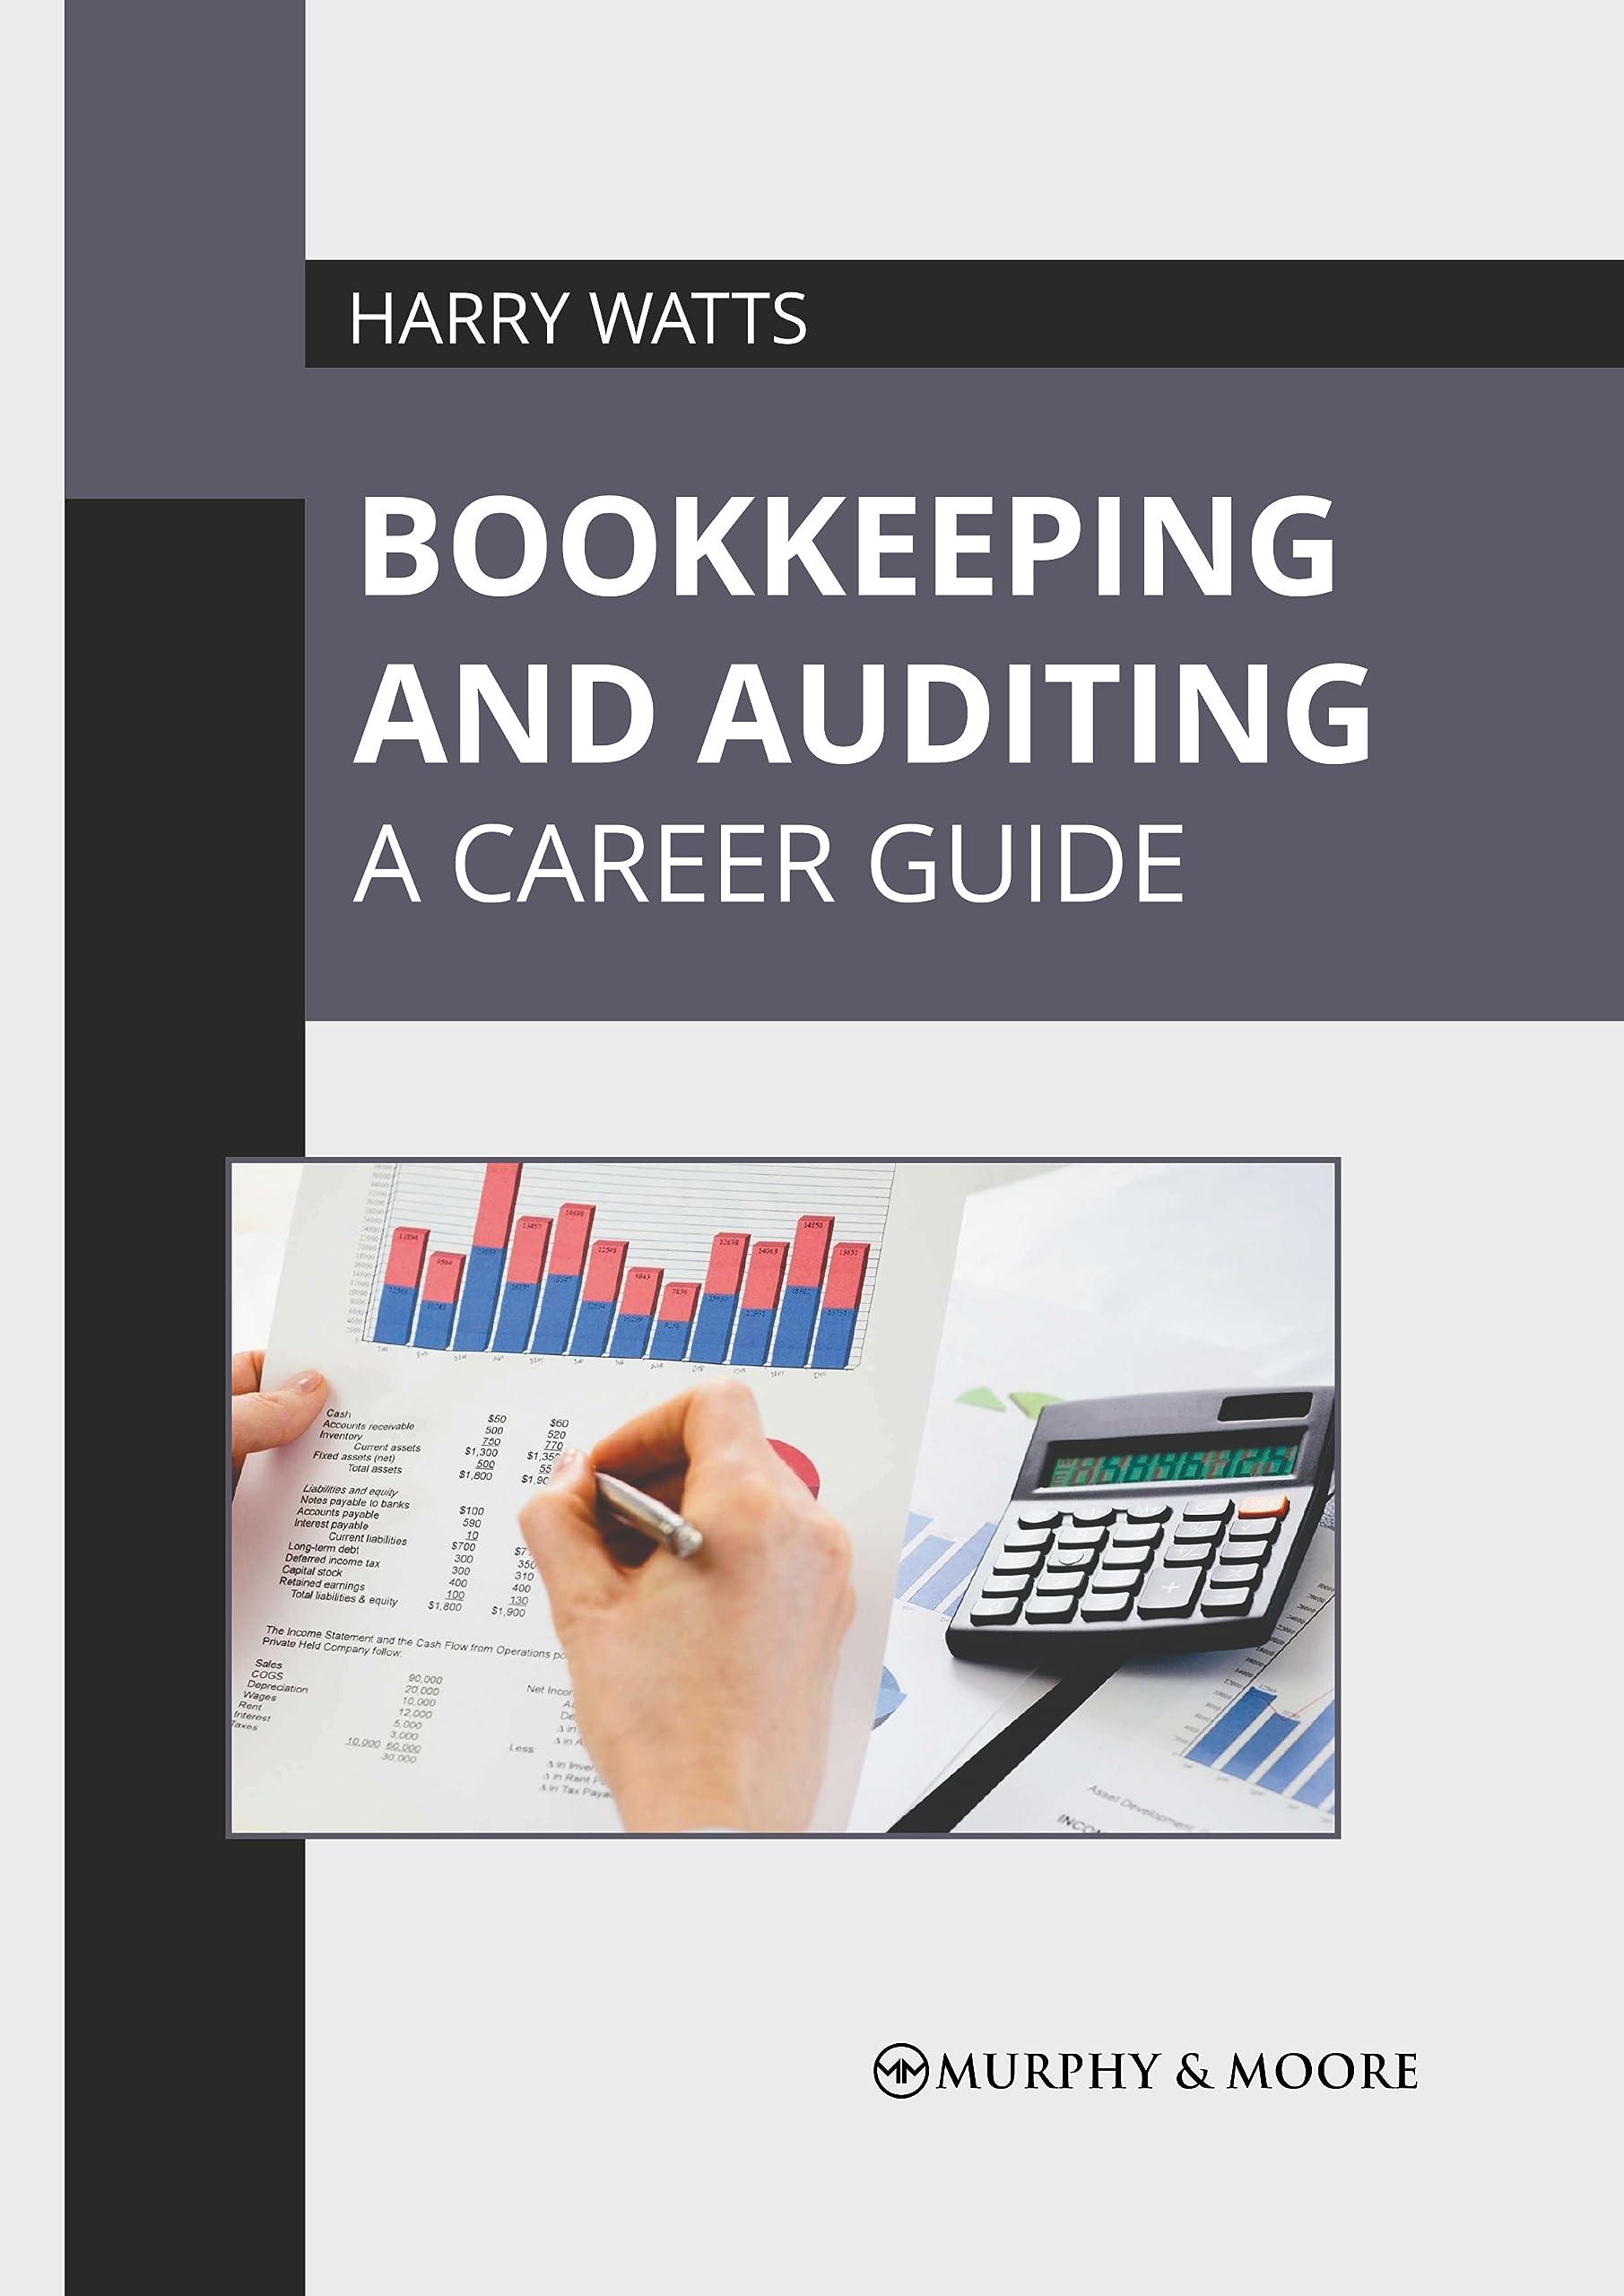 bookkeeping and auditing a career guide 1st edition harry watts 1639878106, 1639878106